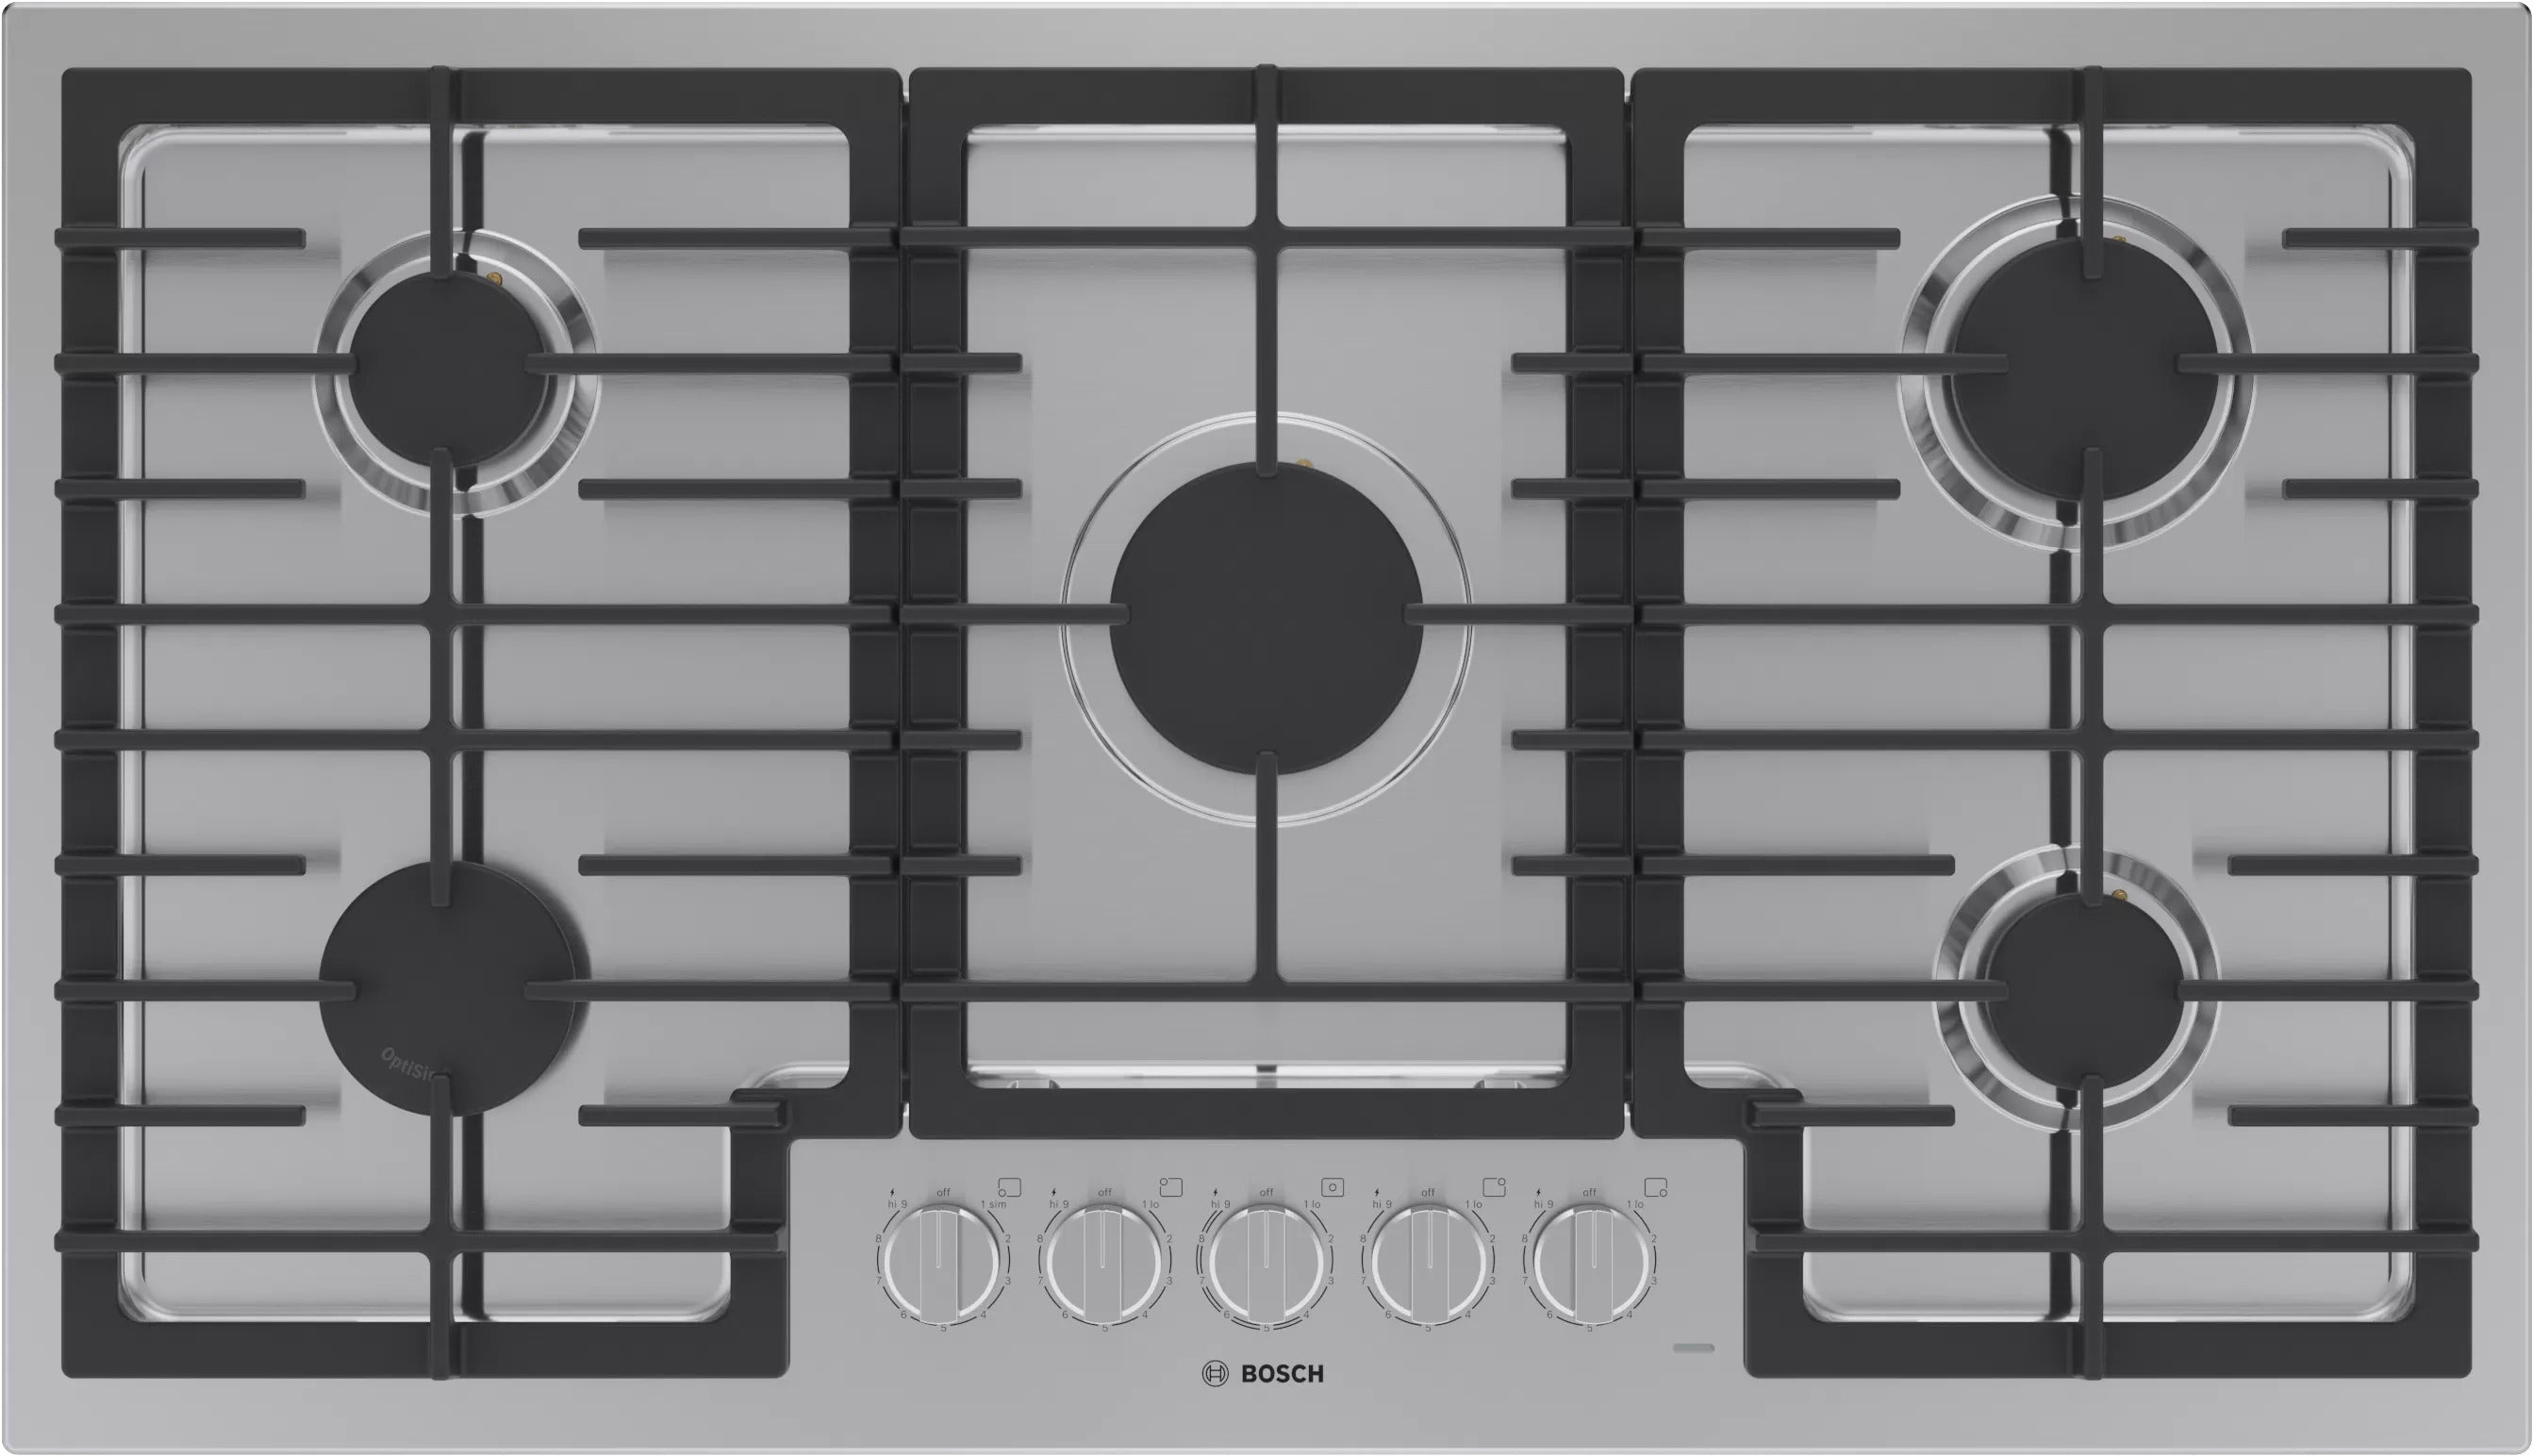 Bosch - 37 inch wide Gas Cooktop in Stainless - NGM5658UC